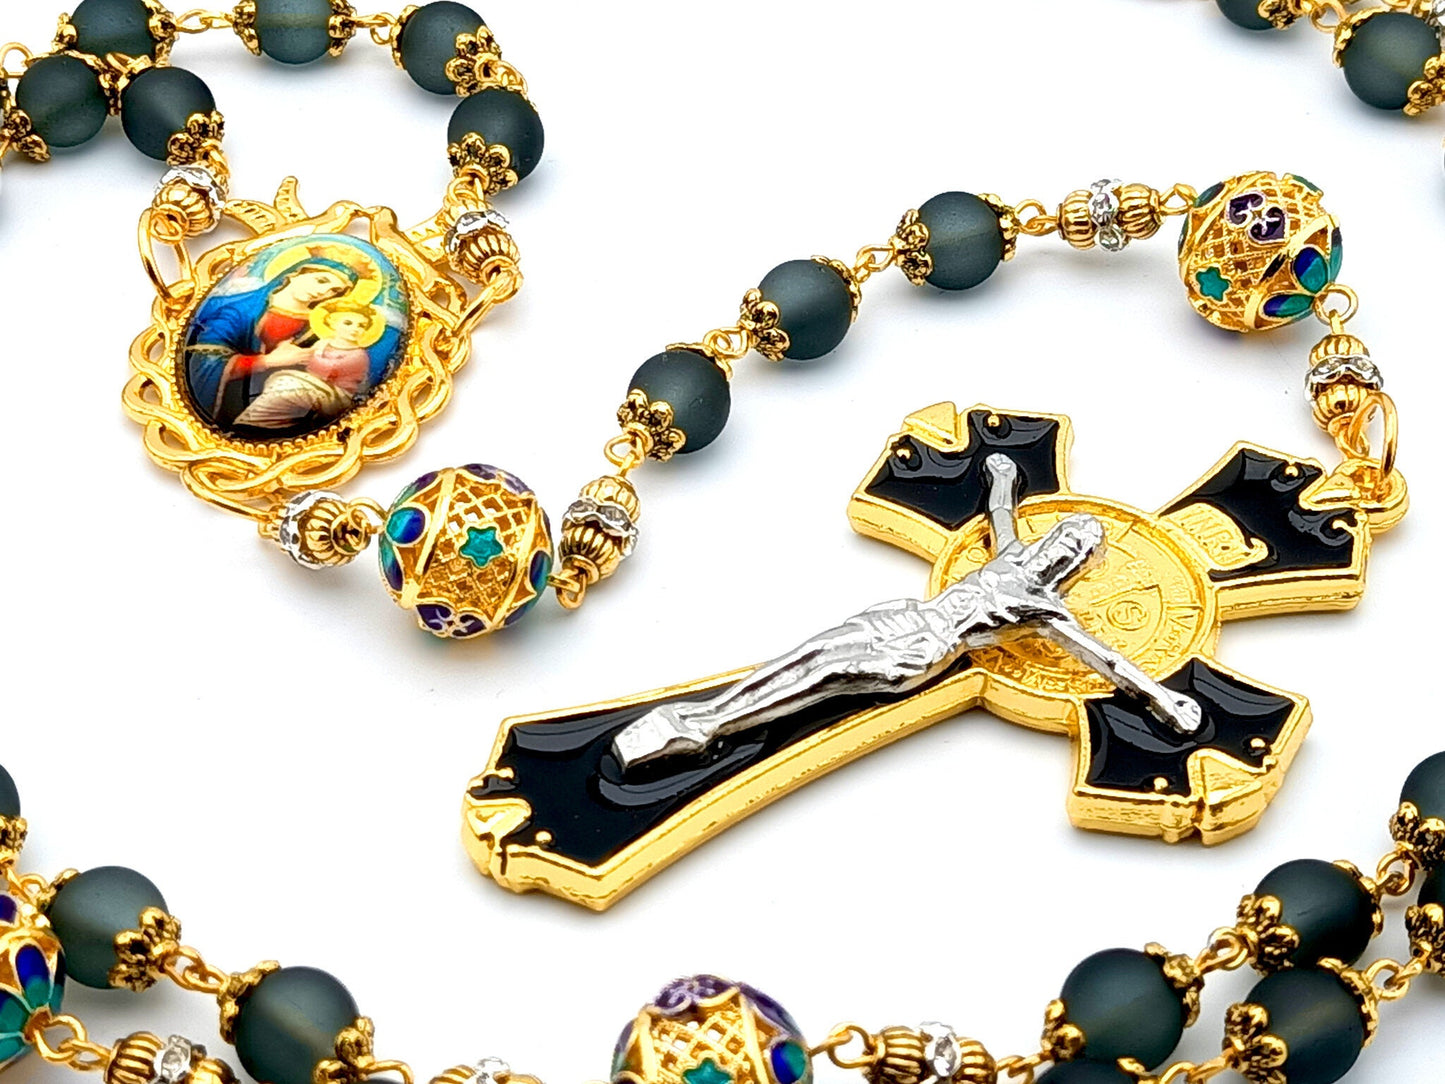 Our Lady of Perpetual Help unique rosary beads with black and gold glass beads, black and gold enamel crucifix and gold picture centre medal.